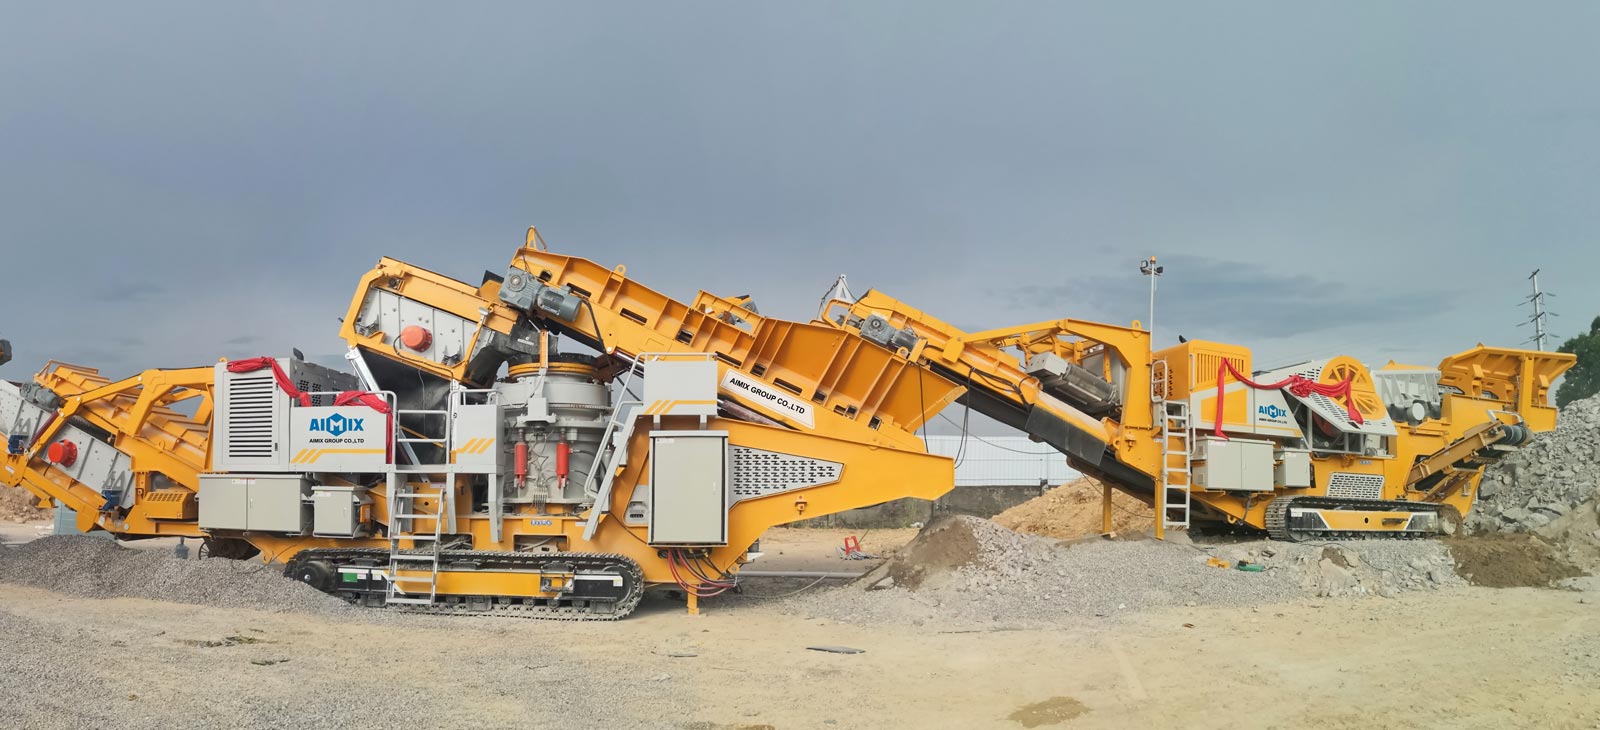 Gravel and Sand crusher in the Philippines AImix Group